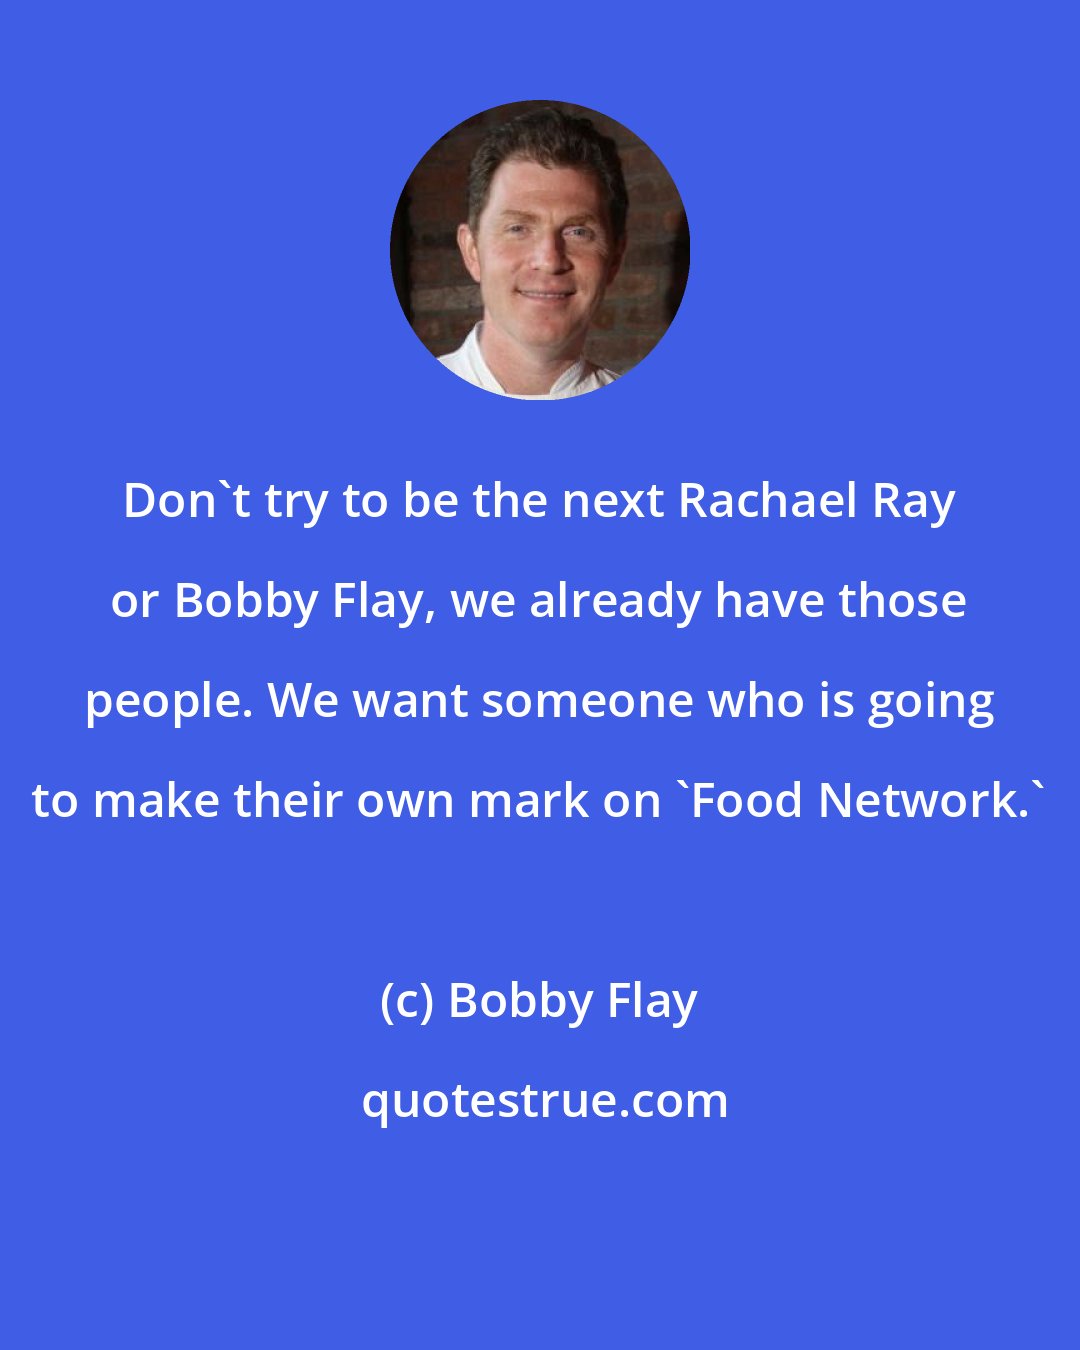 Bobby Flay: Don't try to be the next Rachael Ray or Bobby Flay, we already have those people. We want someone who is going to make their own mark on 'Food Network.'